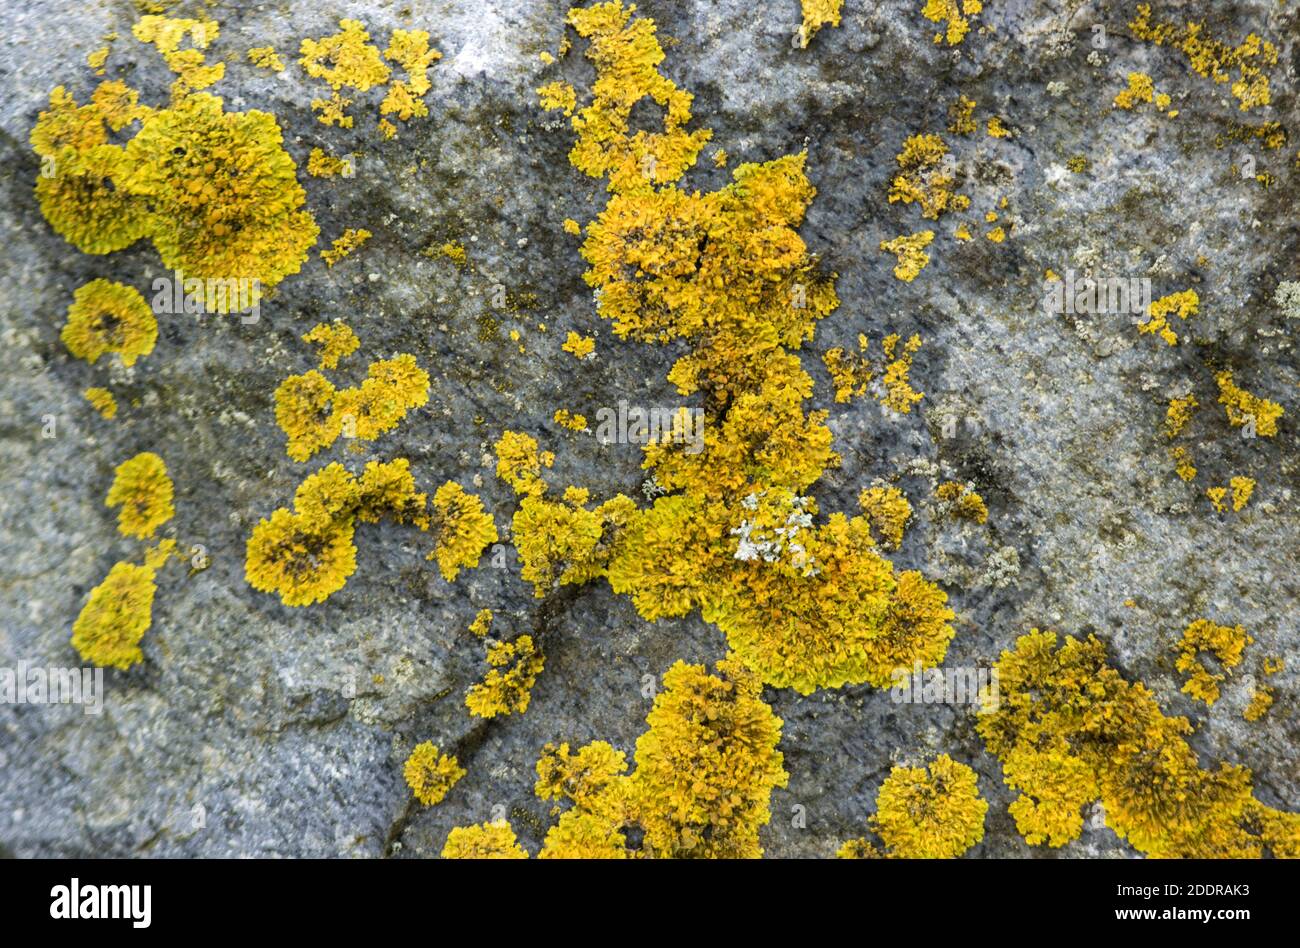 One of the commonest and most distinguishable lichens, the Golden Crust is common in many habitats and especially on rocks above the tide line Stock Photo